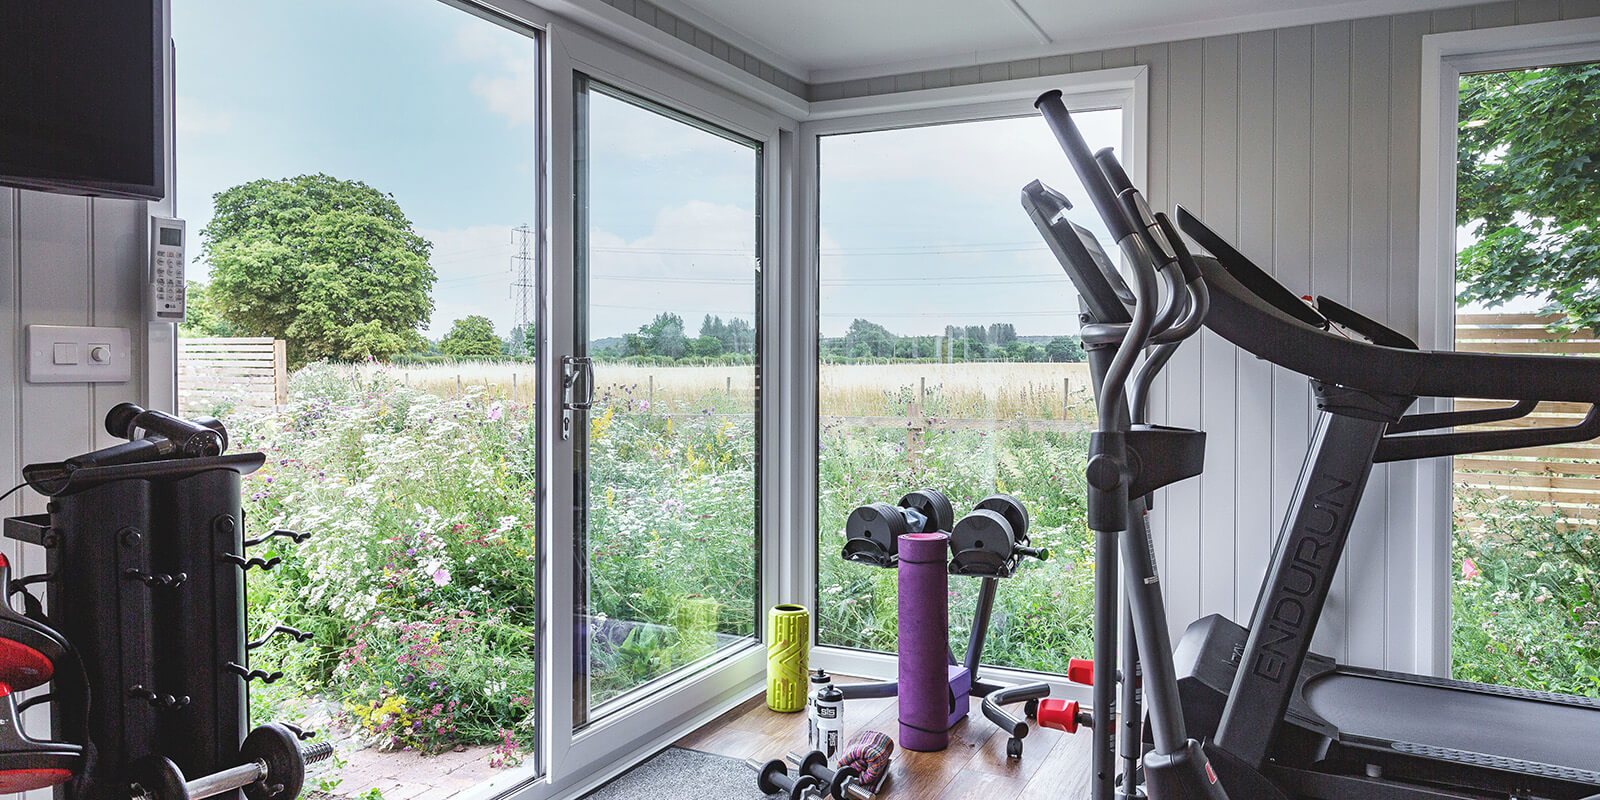 Interior of a garden room gym looking out into a lovely picturesque garden, with gym equipment seen 